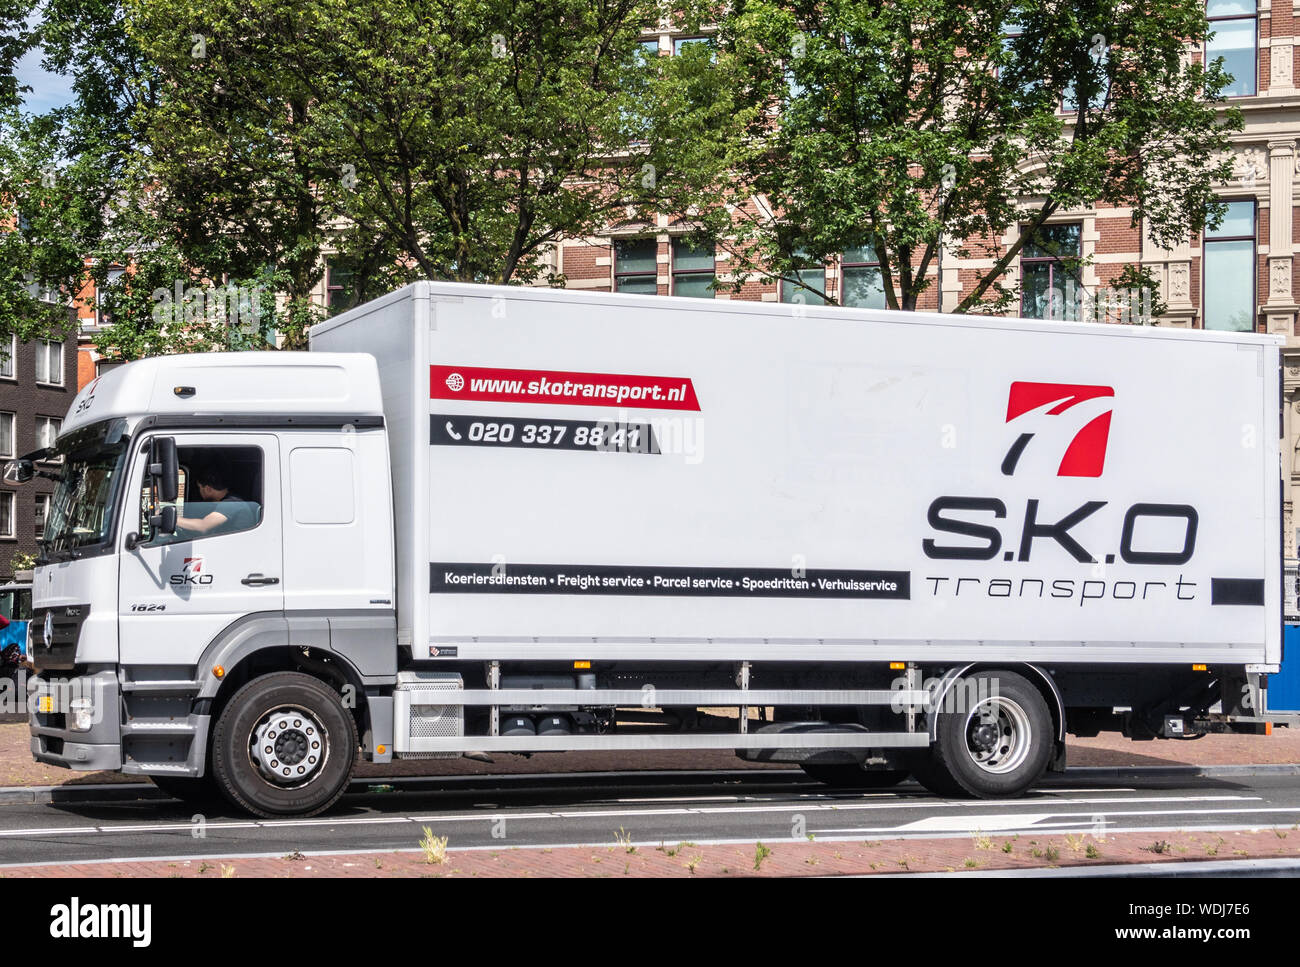 Amsterdam, the Netherlands - June 30, 2019: Large white transport truck with black red lettering for S.K.O. company. Green foliage above. Brown-wh Stock Photo - Alamy